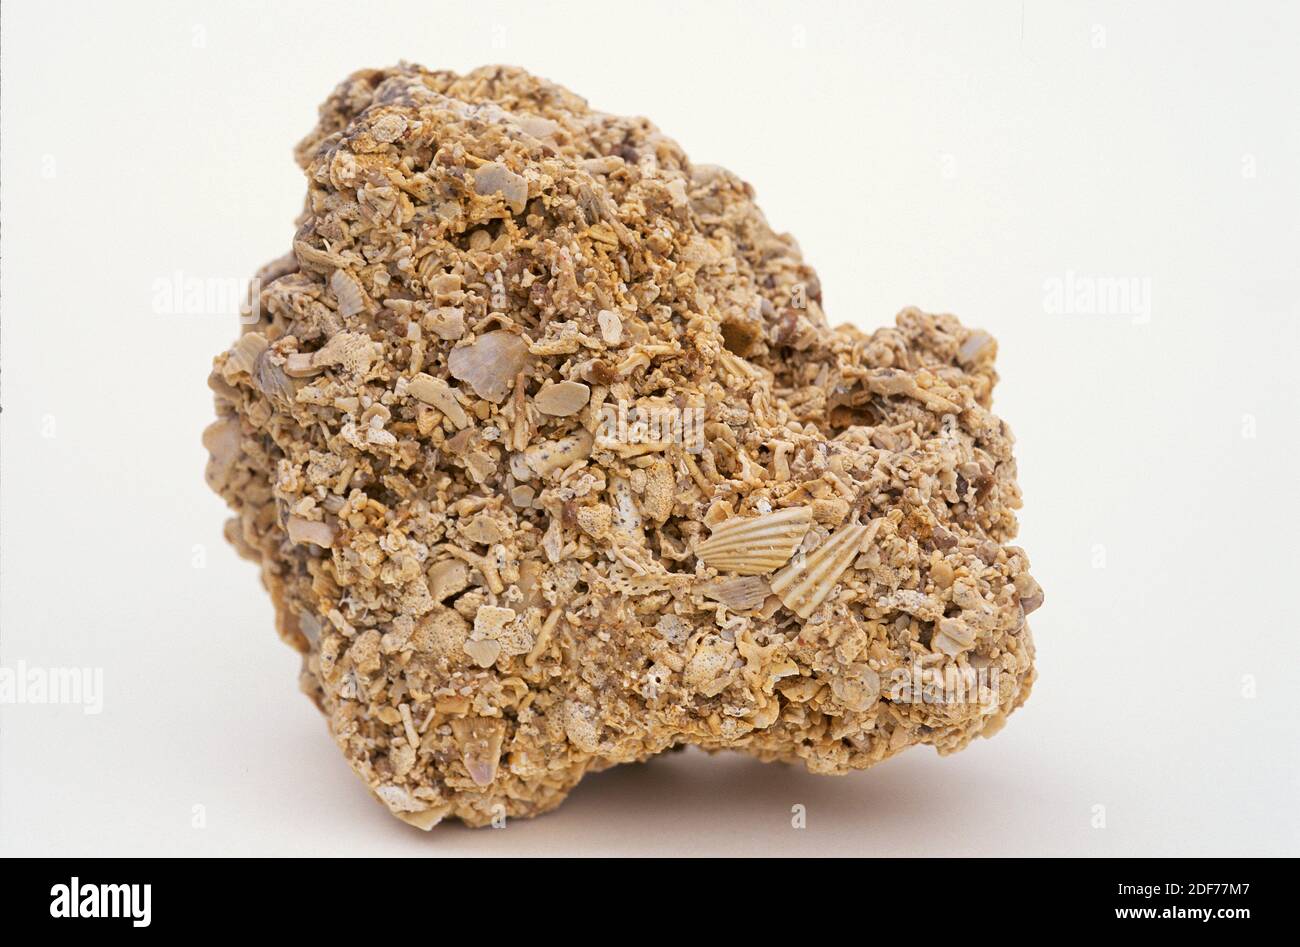 Shelly limestone is a sedimentary rock composed by skeleton remains of marine animals. Sample. Stock Photo